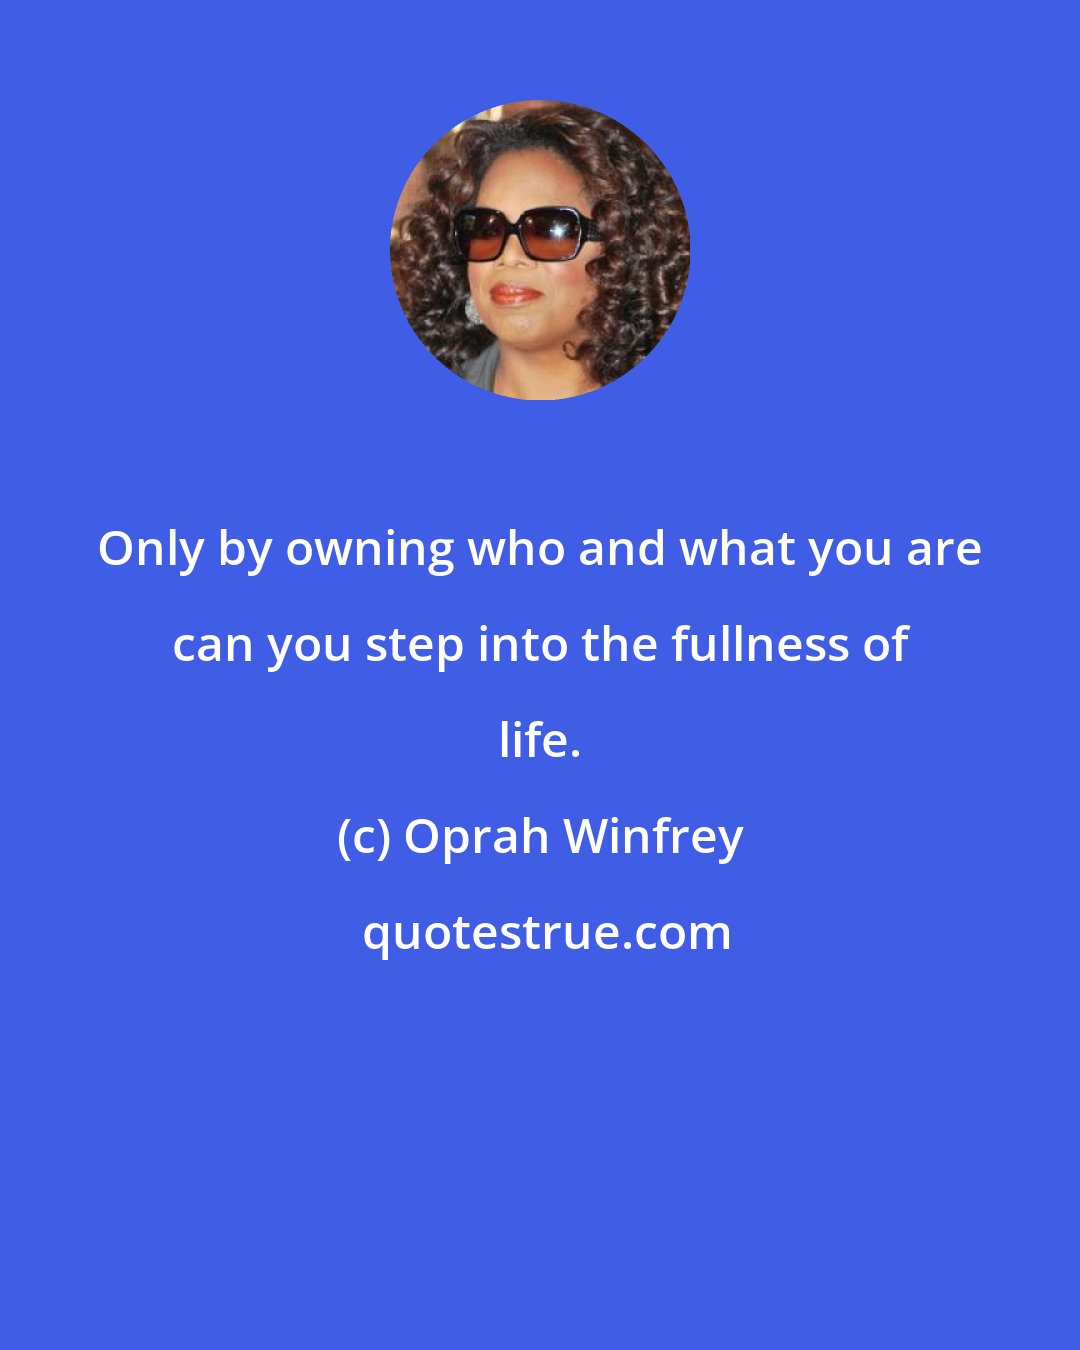 Oprah Winfrey: Only by owning who and what you are can you step into the fullness of life.